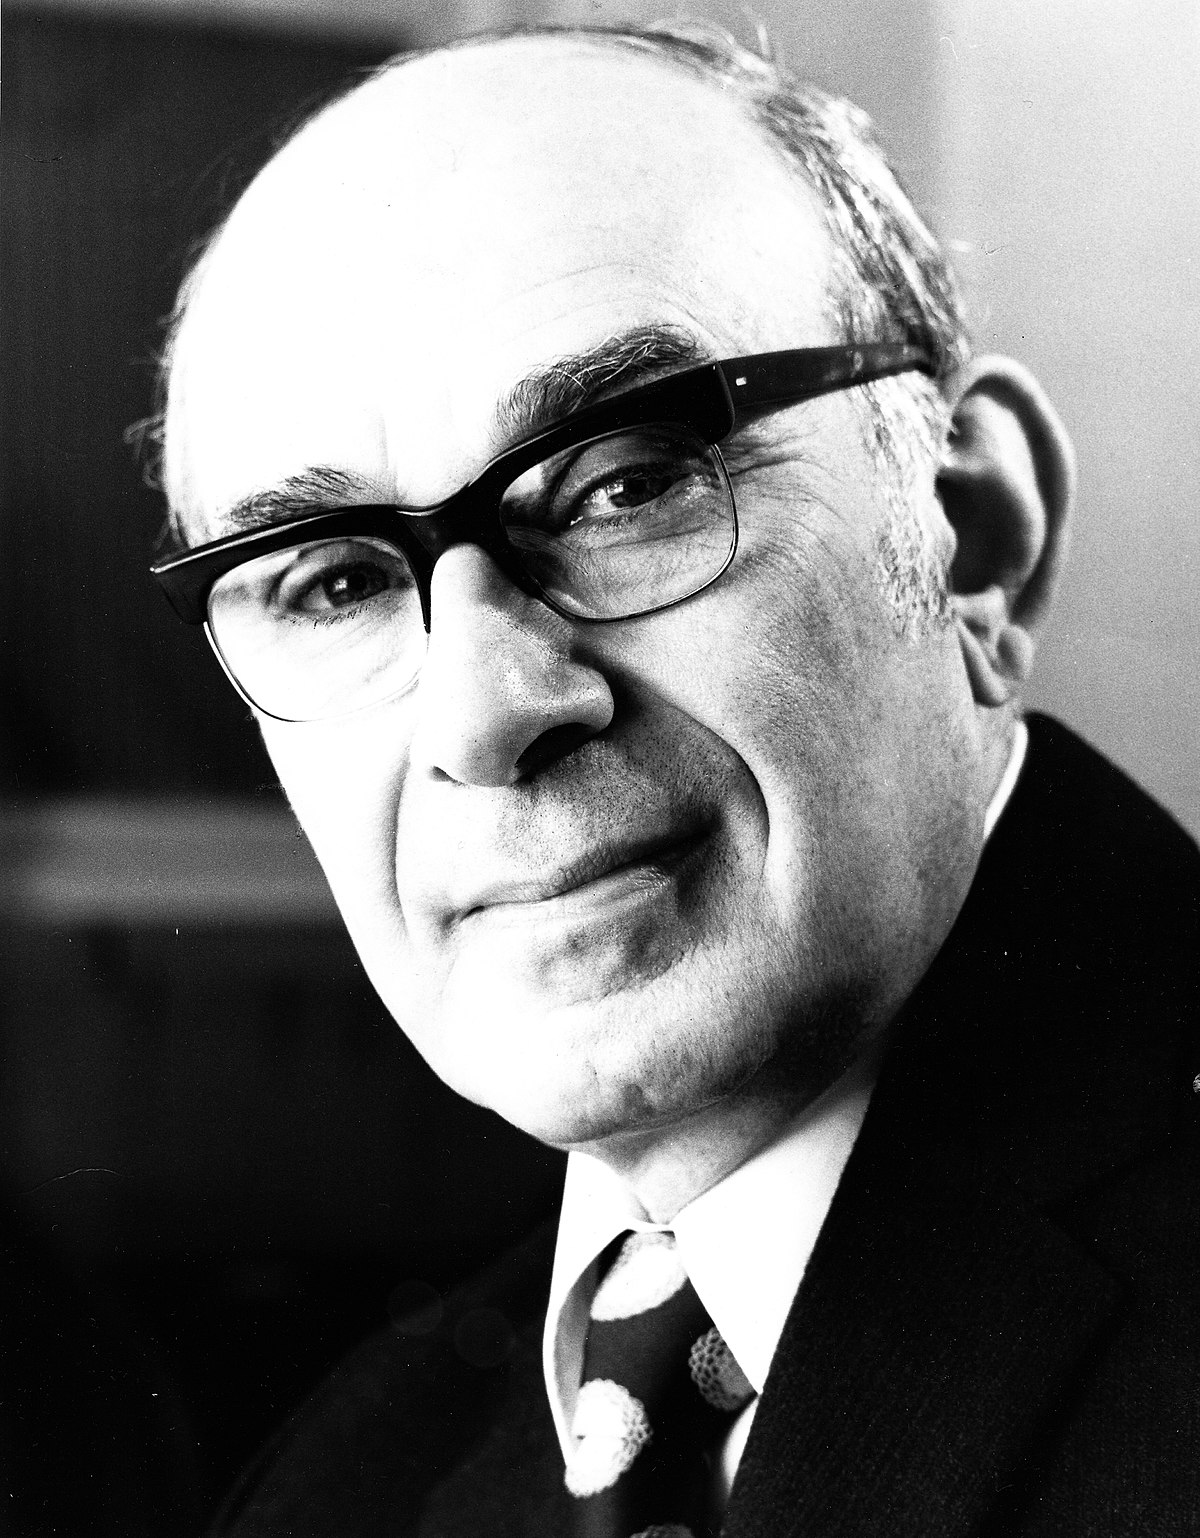 John Yudkin was a food scientist who tried hard to push the idea that sugar caused heart disease and obesity amongst other conditions. He suggested a low carb diet for weight loss in 1958. The sugar industry paid scientists like Ansel Keys and D. Mark Hegsted to downplay this connection and suggest that dietary fat caused obesity and heart disease. Massive lobbying helped pro sugar scientists to become advisors to government and officially suggest a low fat diet to prevent heart disease. Taking fat out of food makes it taste bad, so what do they add? More sugar, causing the food to be unhealthier. The demonising of fat lasted well into the 2000's and often still persists to this day. u/Fallenangel152